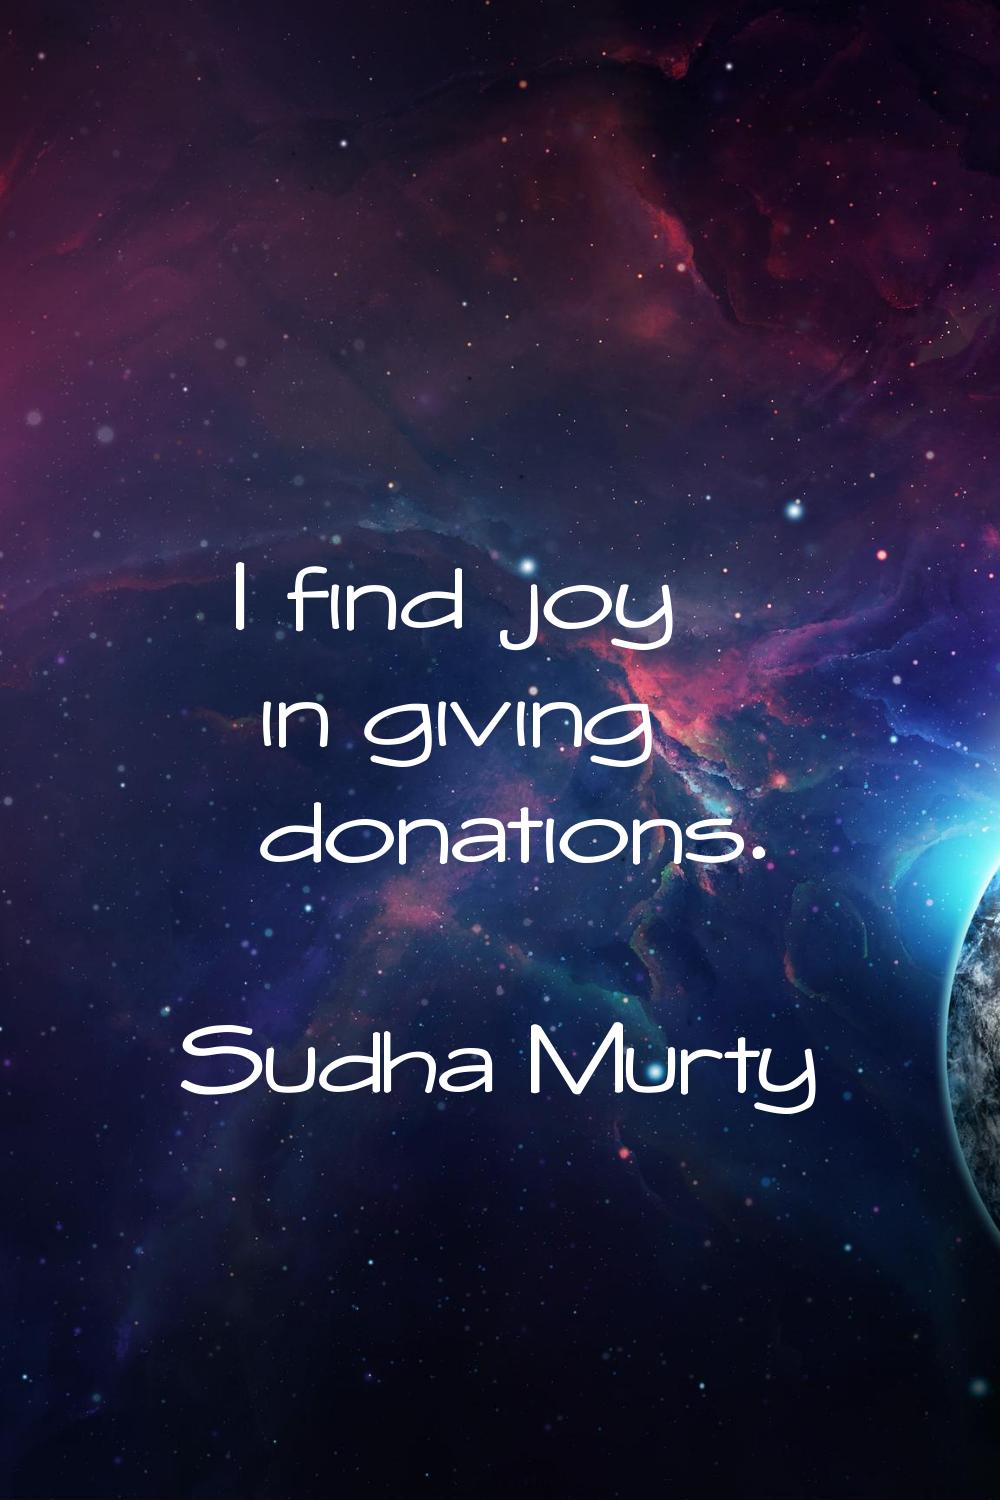 I find joy in giving donations.